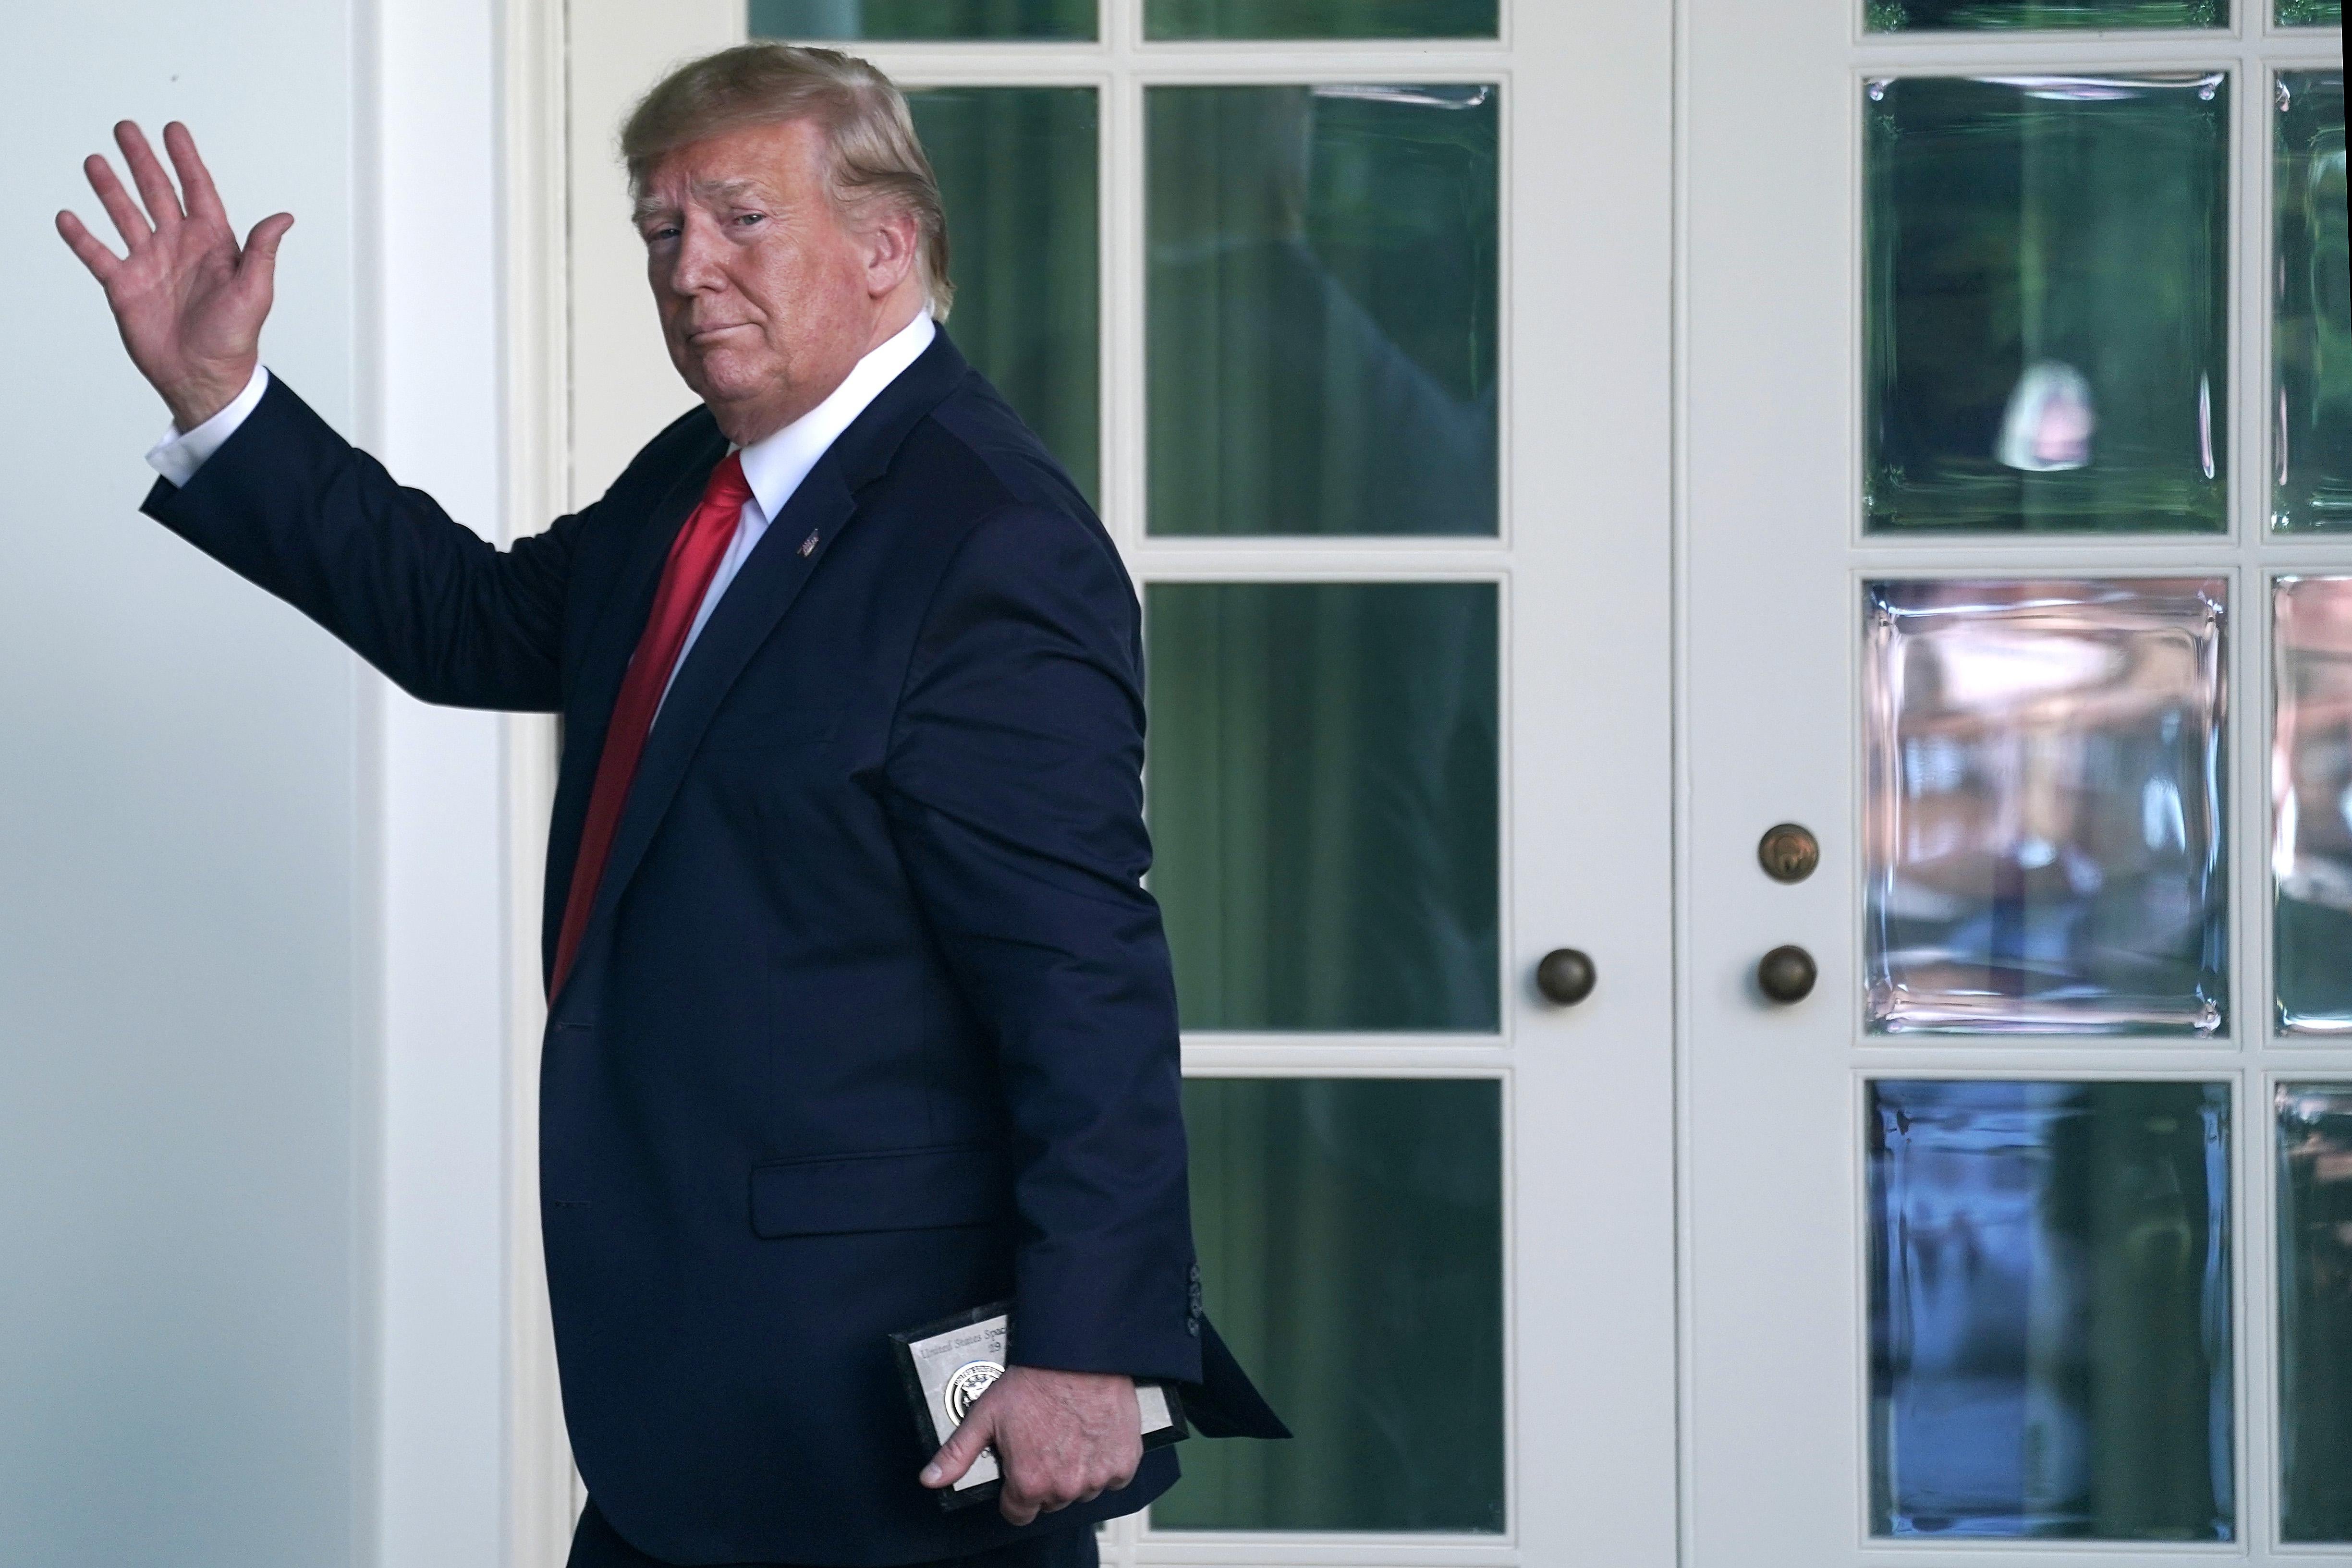 WASHINGTON, DC - AUGUST 29: U.S. President Donald Trump heads back to the Oval Office after attending an event establishing the U.S. Space Command, the sixth national armed service, in the Rose Garden at the White House August 29, 2019 in Washington, DC. Citing potential threats from China and Russia and the nation’s reliance on satellites for defense operations, Trump said the U.S. needs to launch a 'space force.' U.S. Air Force Gen. John Raymond will serve as the first head of Space Command, which will have 87 active units handling operations such as missile warning, satellite surveillance, space control and space support. (Photo by Chip Somodevilla/Getty Images)